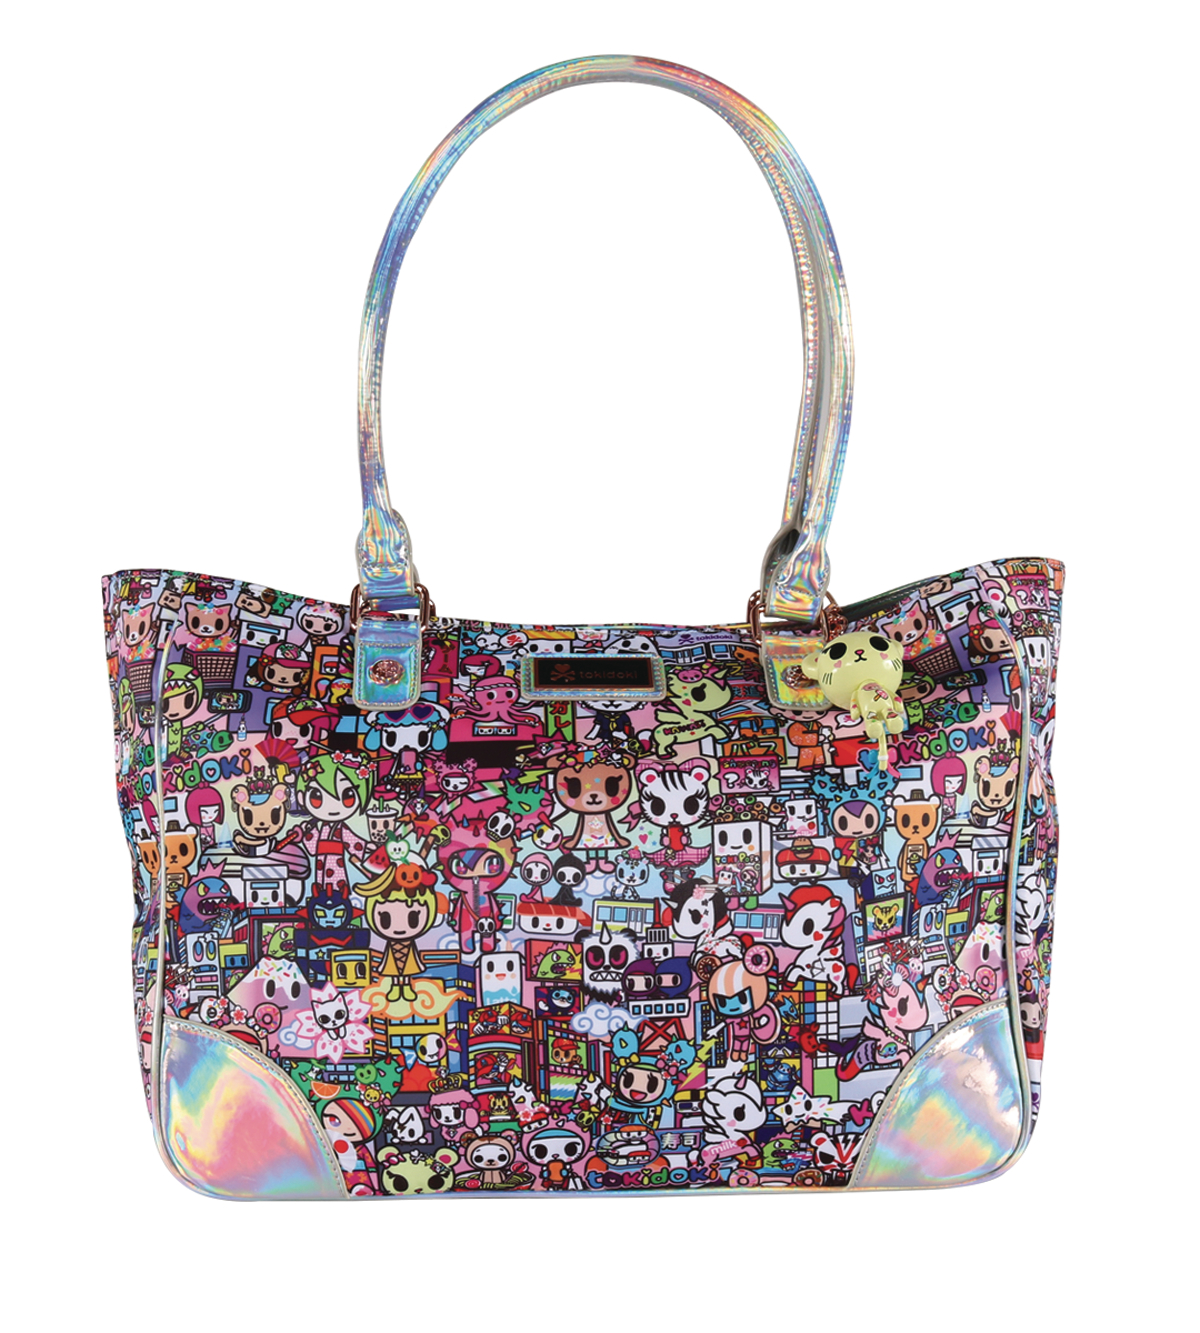 AUG172552 - TOKIDOKI ALL OVER PATTERN DESIGNER TOTE PURSE - Previews World